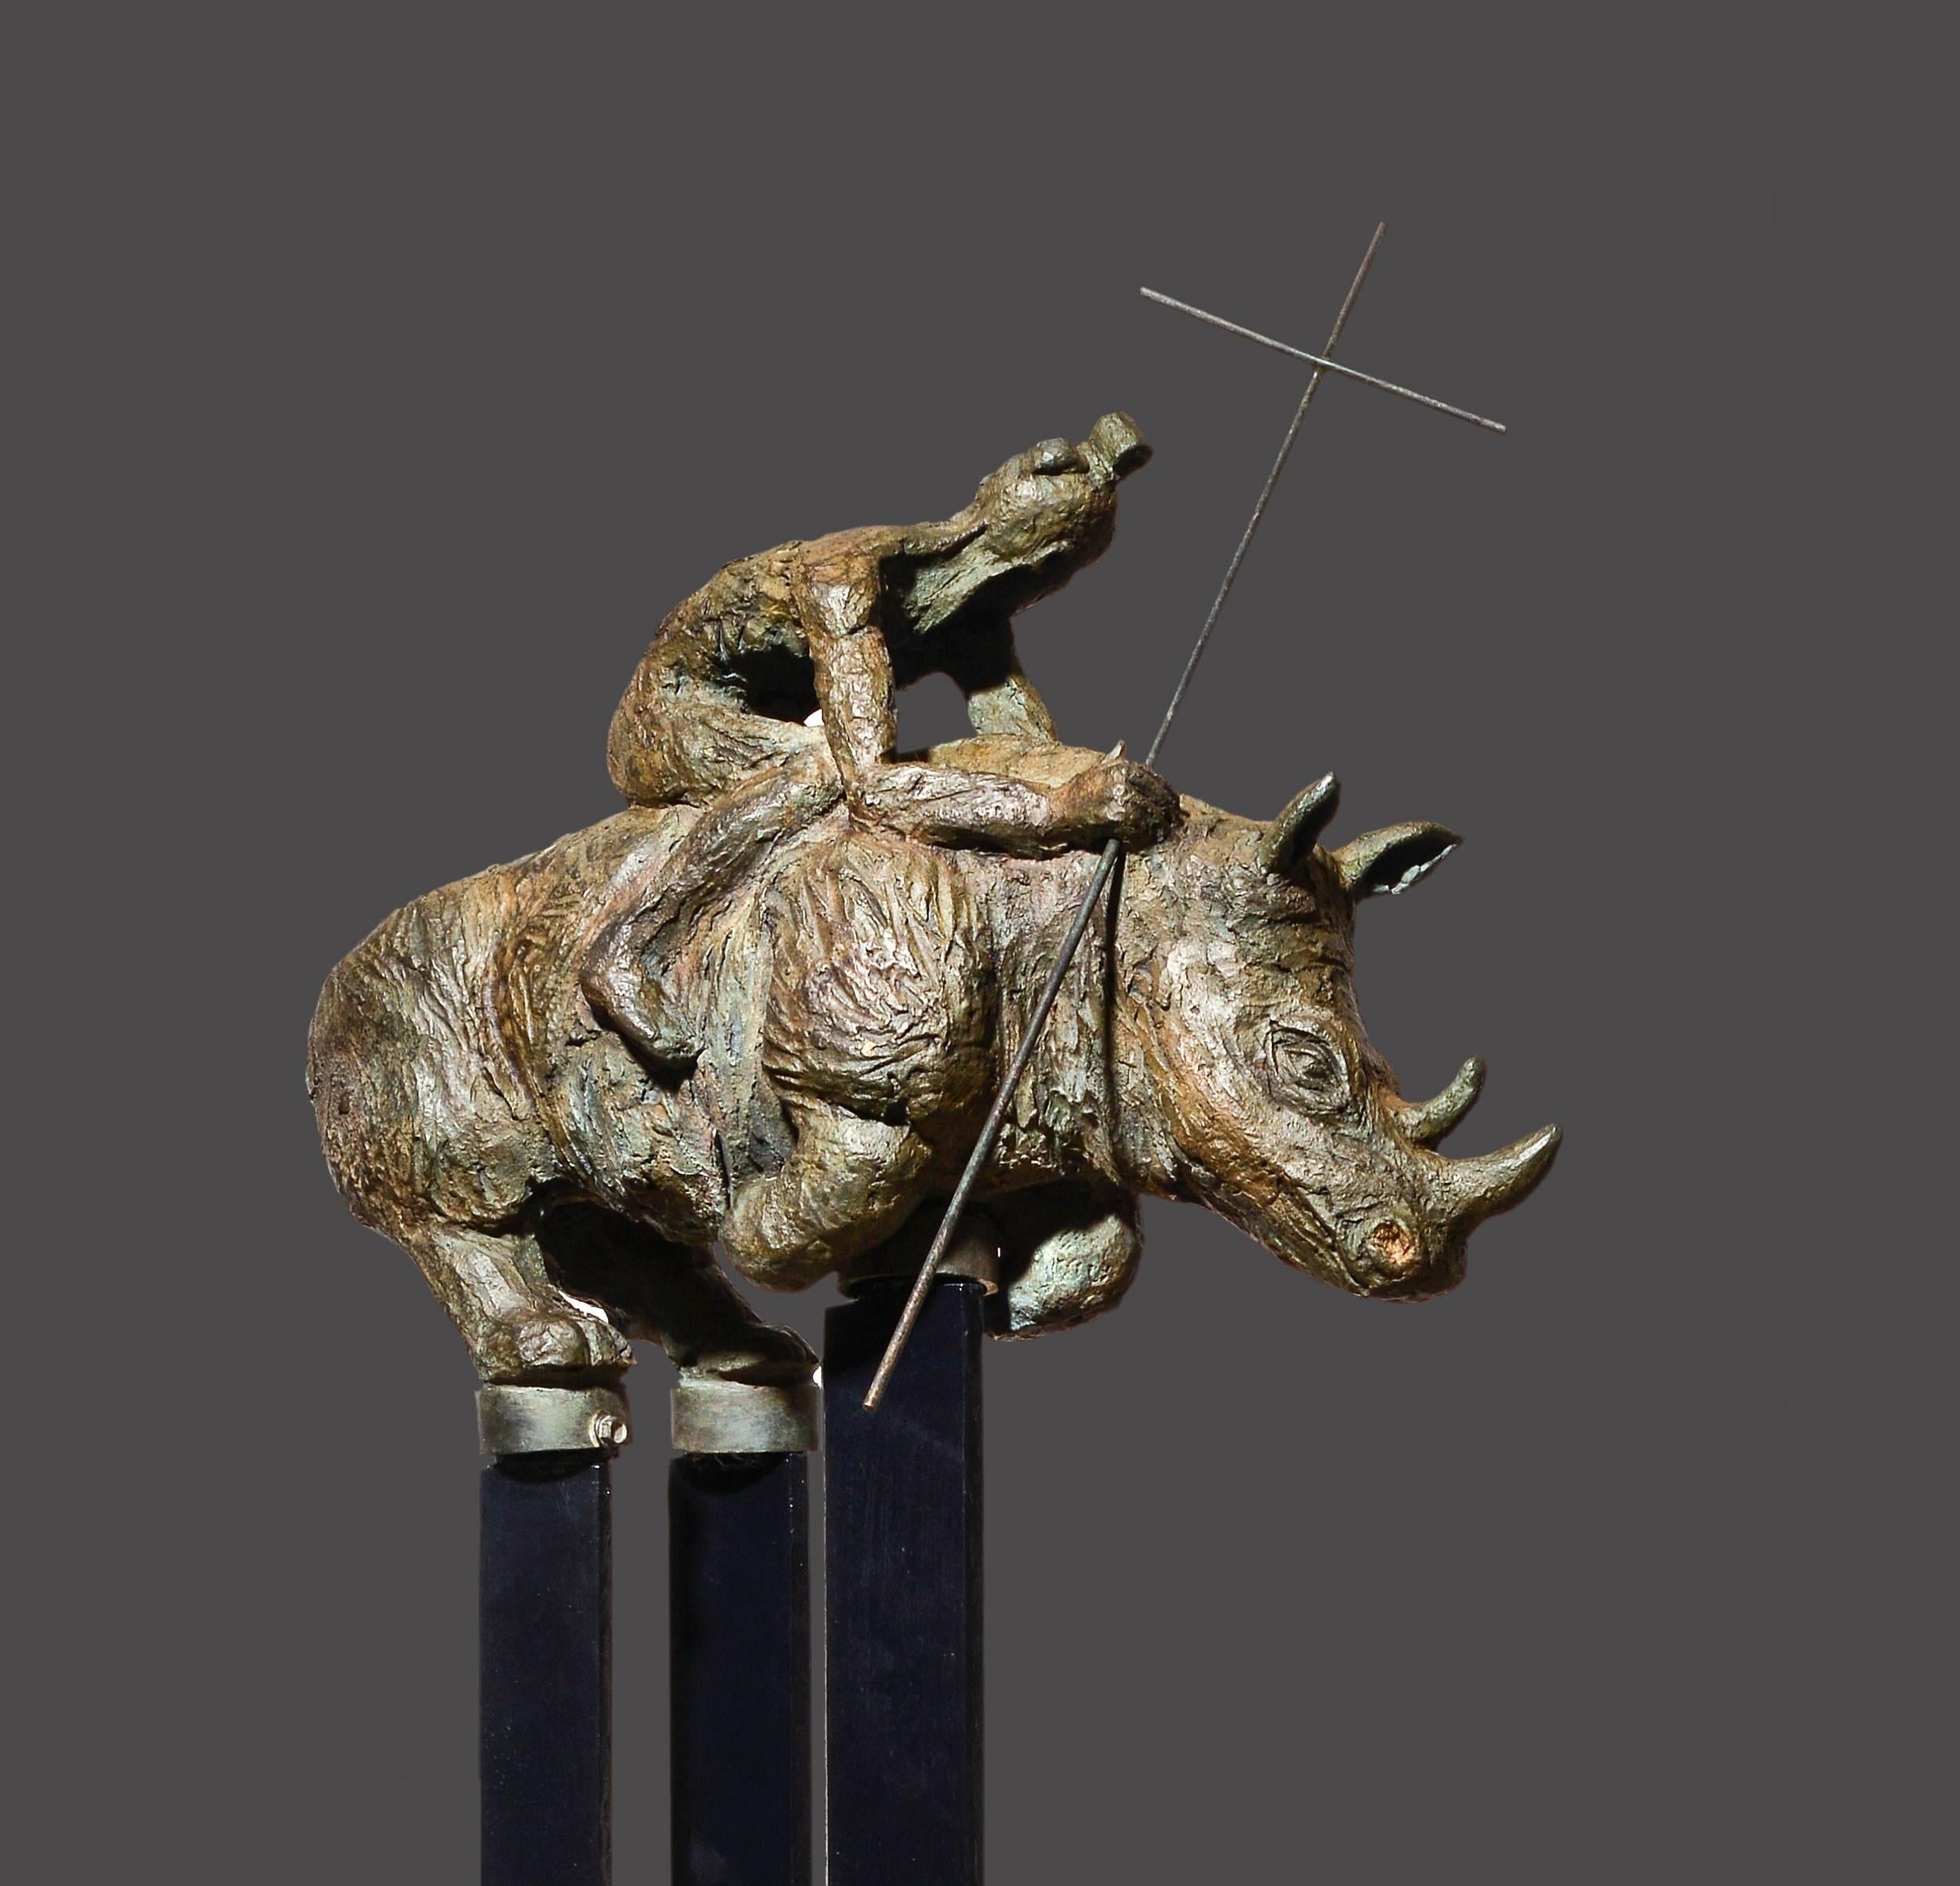 The ultimate ride of the Christians Samurais riding their rhinoceroses.
Historical work by the sculptor Mariko about the troubled period of the 17th. Century where the Christians were persecuted in Japan.
This period of time inspired the director of